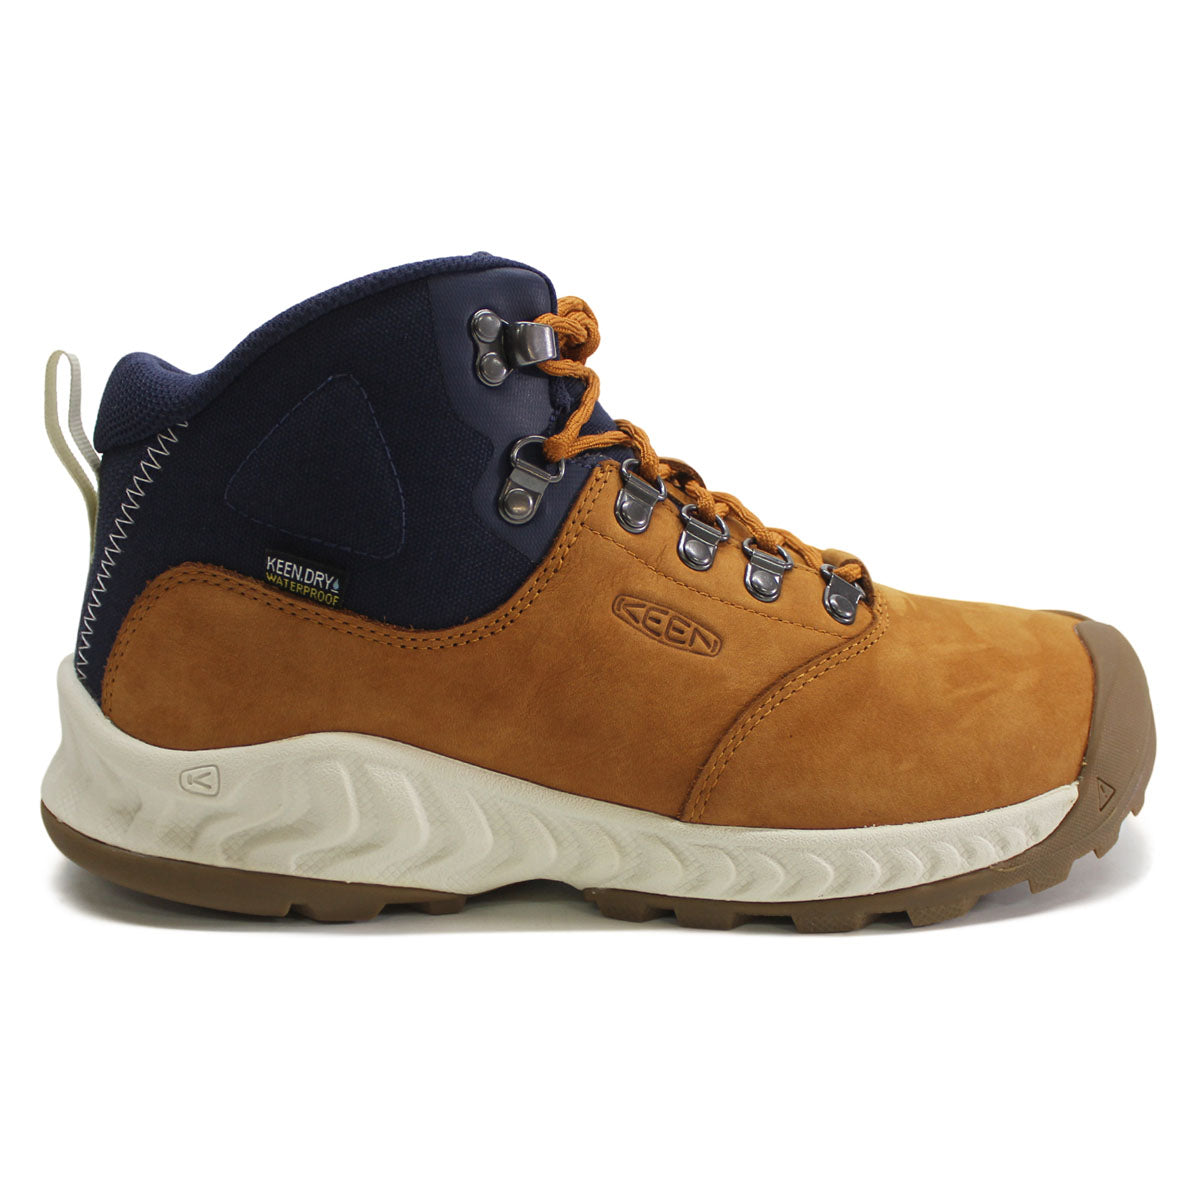 Keen Womens Nxis Explorer Mid WP Leather Textile Boots - UK 7.5